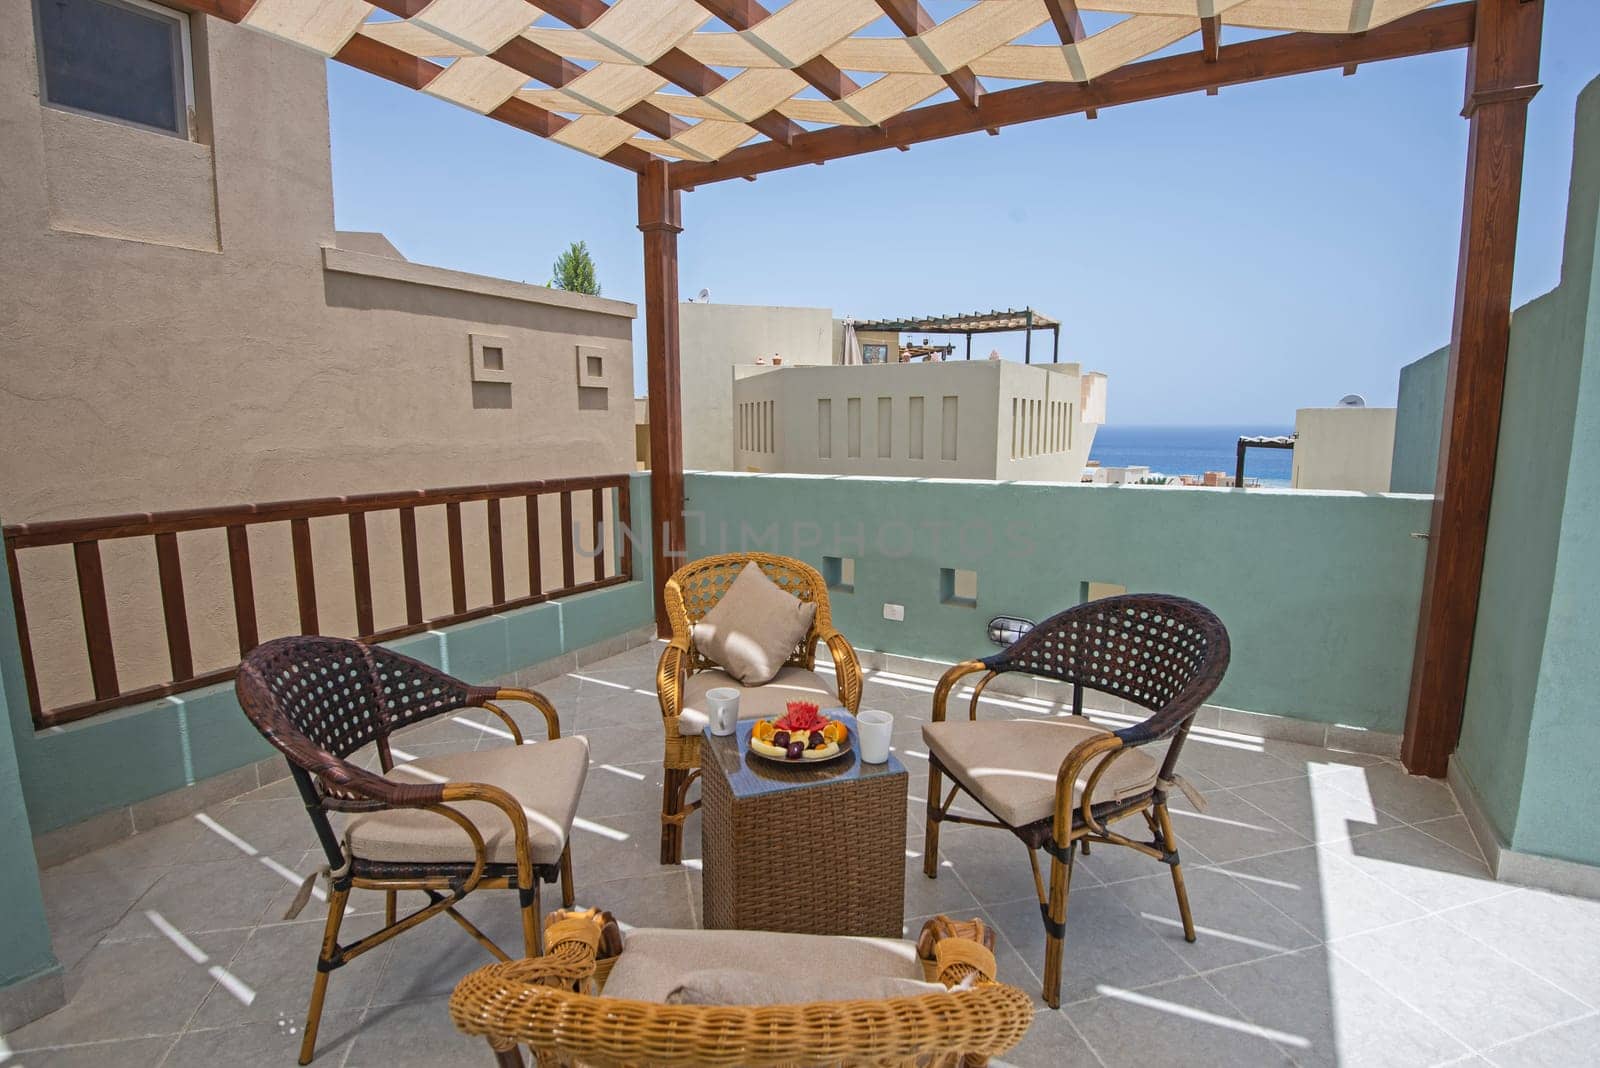 Roof terrace of a luxury apartment in tropical resort with furniture and sea view from balcony